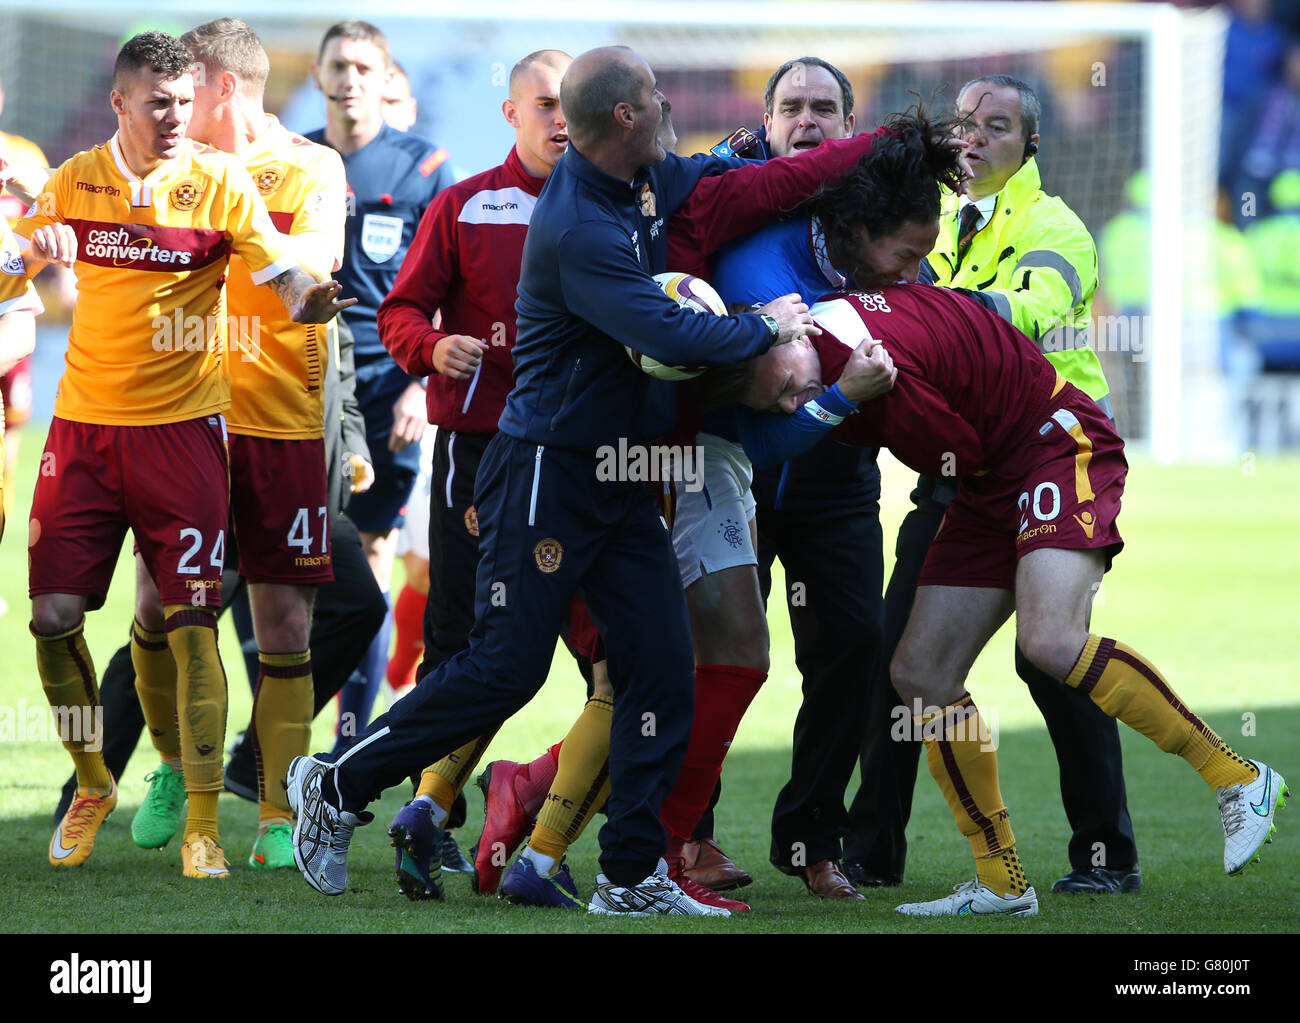 Rangers' Bilel Mohsni involved in a scuffle at full time with Motherwell's Fraser Kerr after the Scottish Premiership Play Off Final, second leg match at Fir Park, Motherwell. PRESS ASSOCIATION Photo. Picture date: Sunday May 31, 2015. See PA Story SOCCER Motherwell. Photo credit should read: Andrew Milligan/PA Wire. EDITORIAL USE ONLY Stock Photo